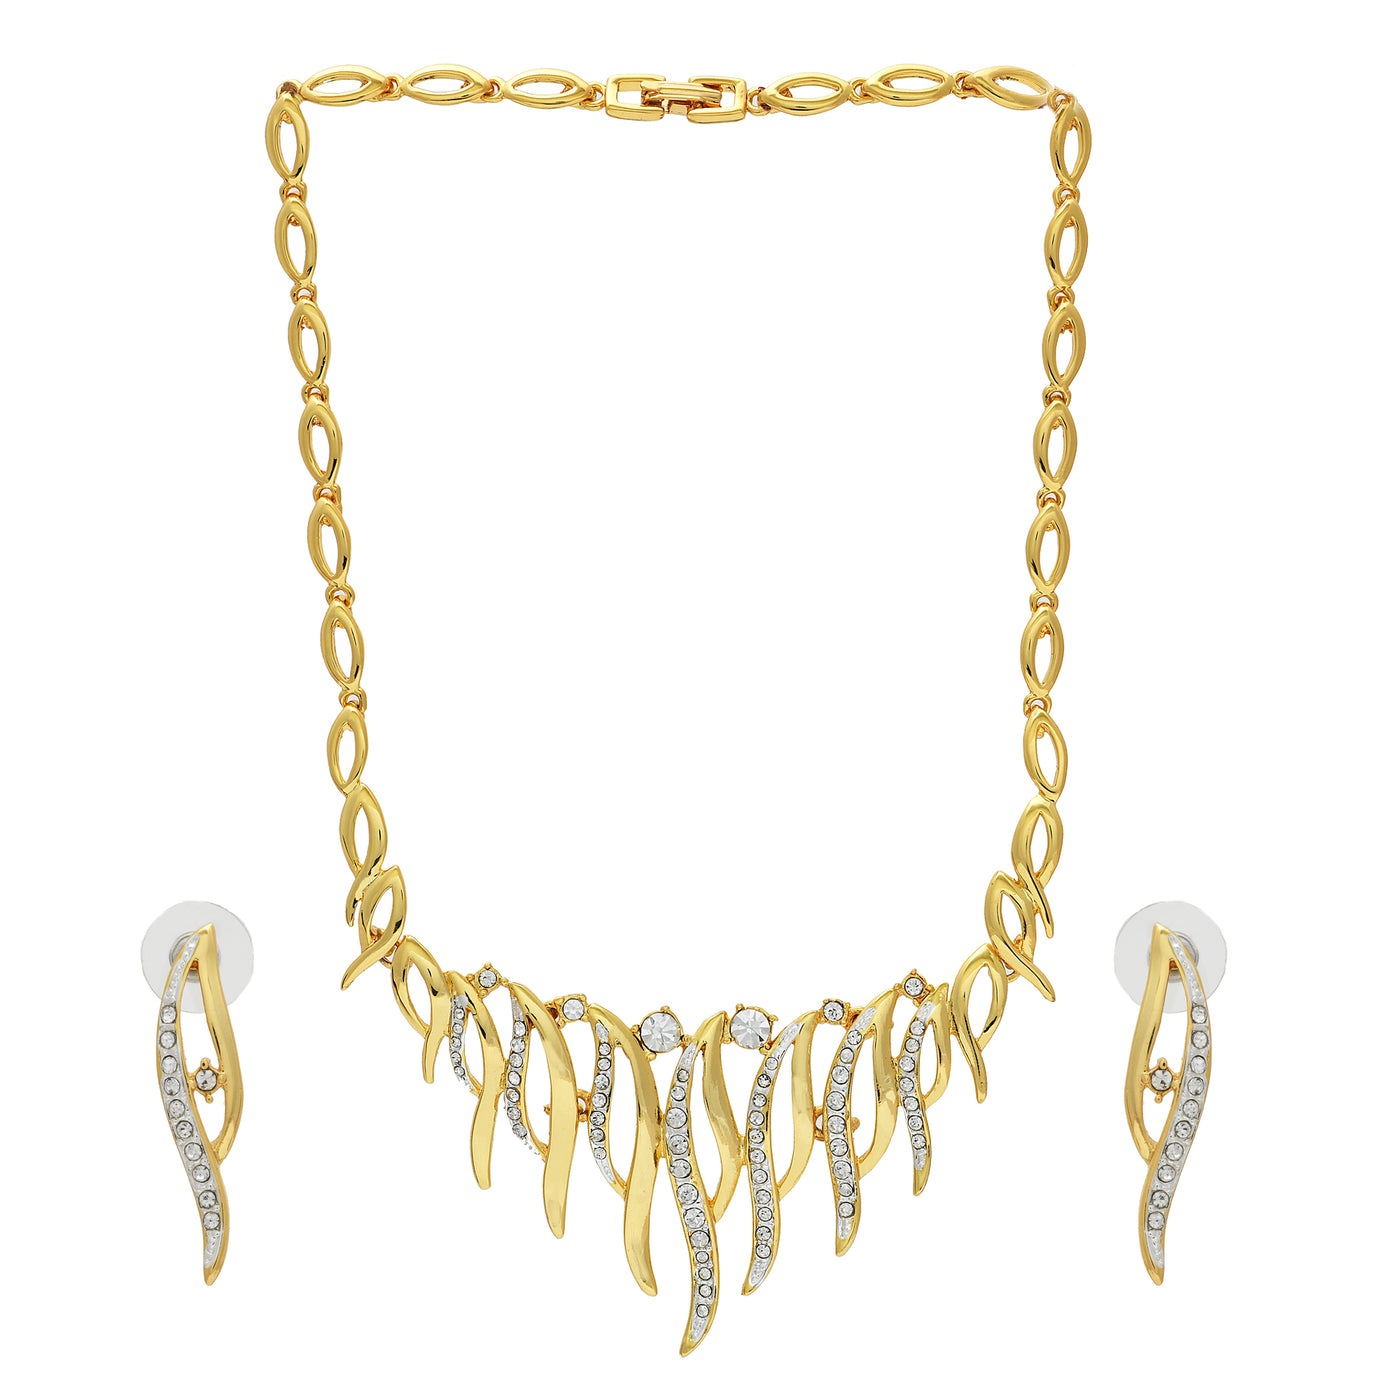 Estele - Modern Gold and Silver Plated Flaming passion Necklace Set